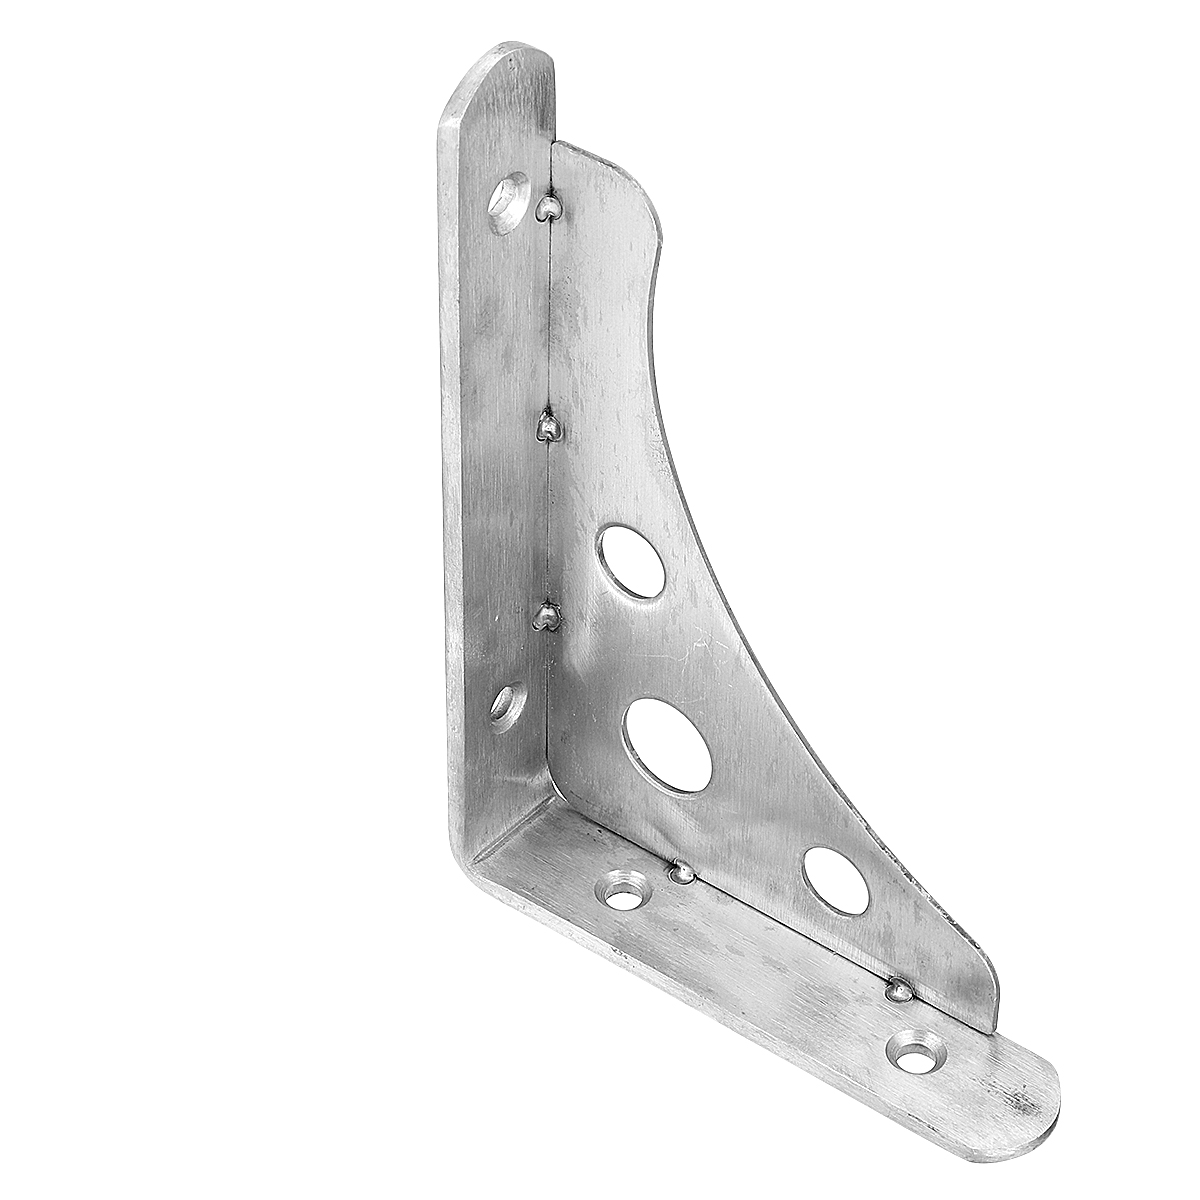 Thick-Stainless-Steel-Bracket-Partition-Load-Bearing-Bracket-Side-Left-And-Right-Tripod-Shelf-Rack-1639406-4